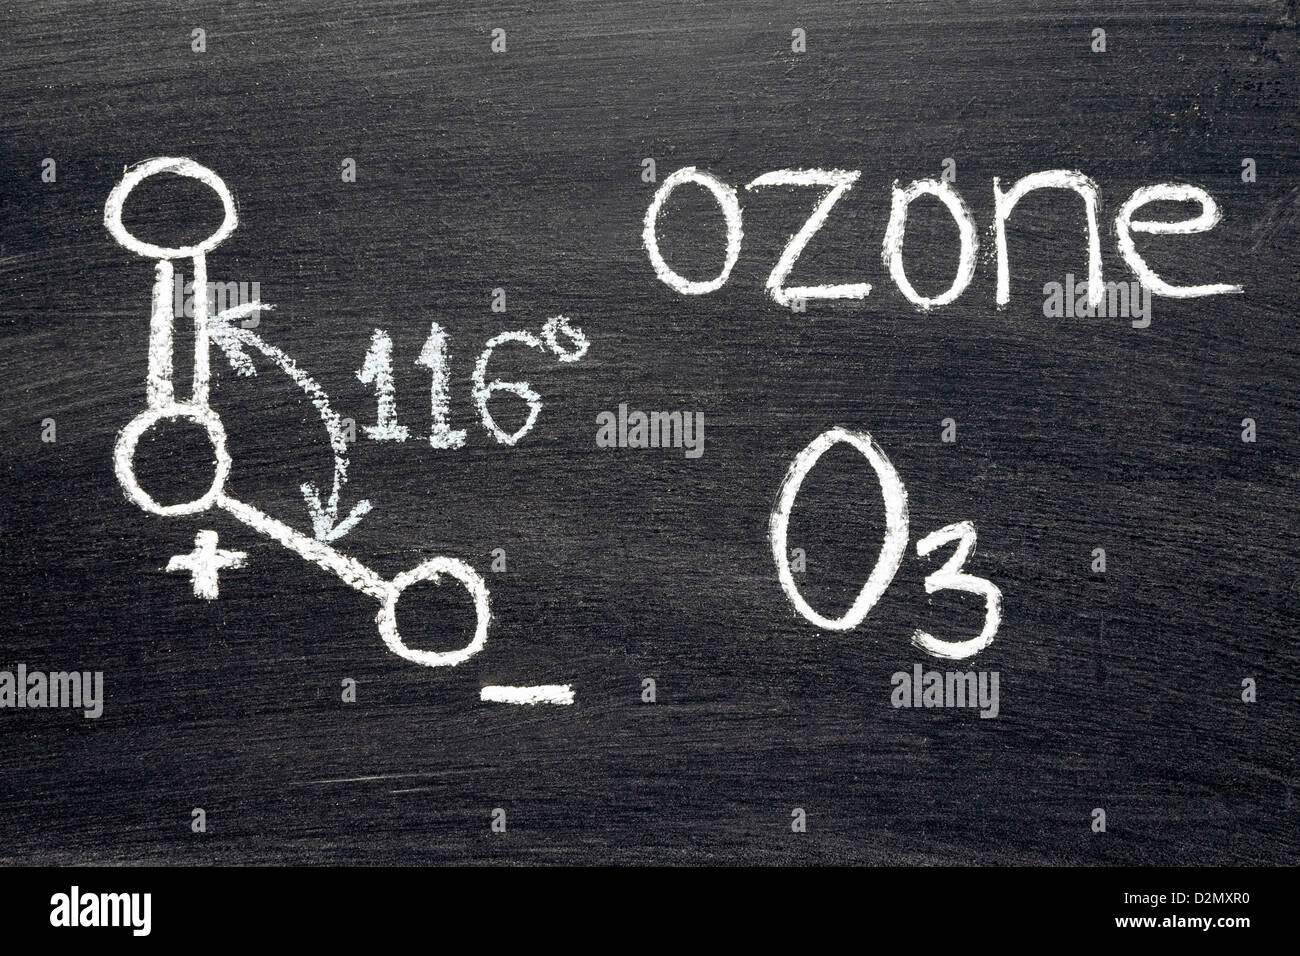 name, chemical formula and structure diagram of Ozone handwritten on blackboard Stock Photo